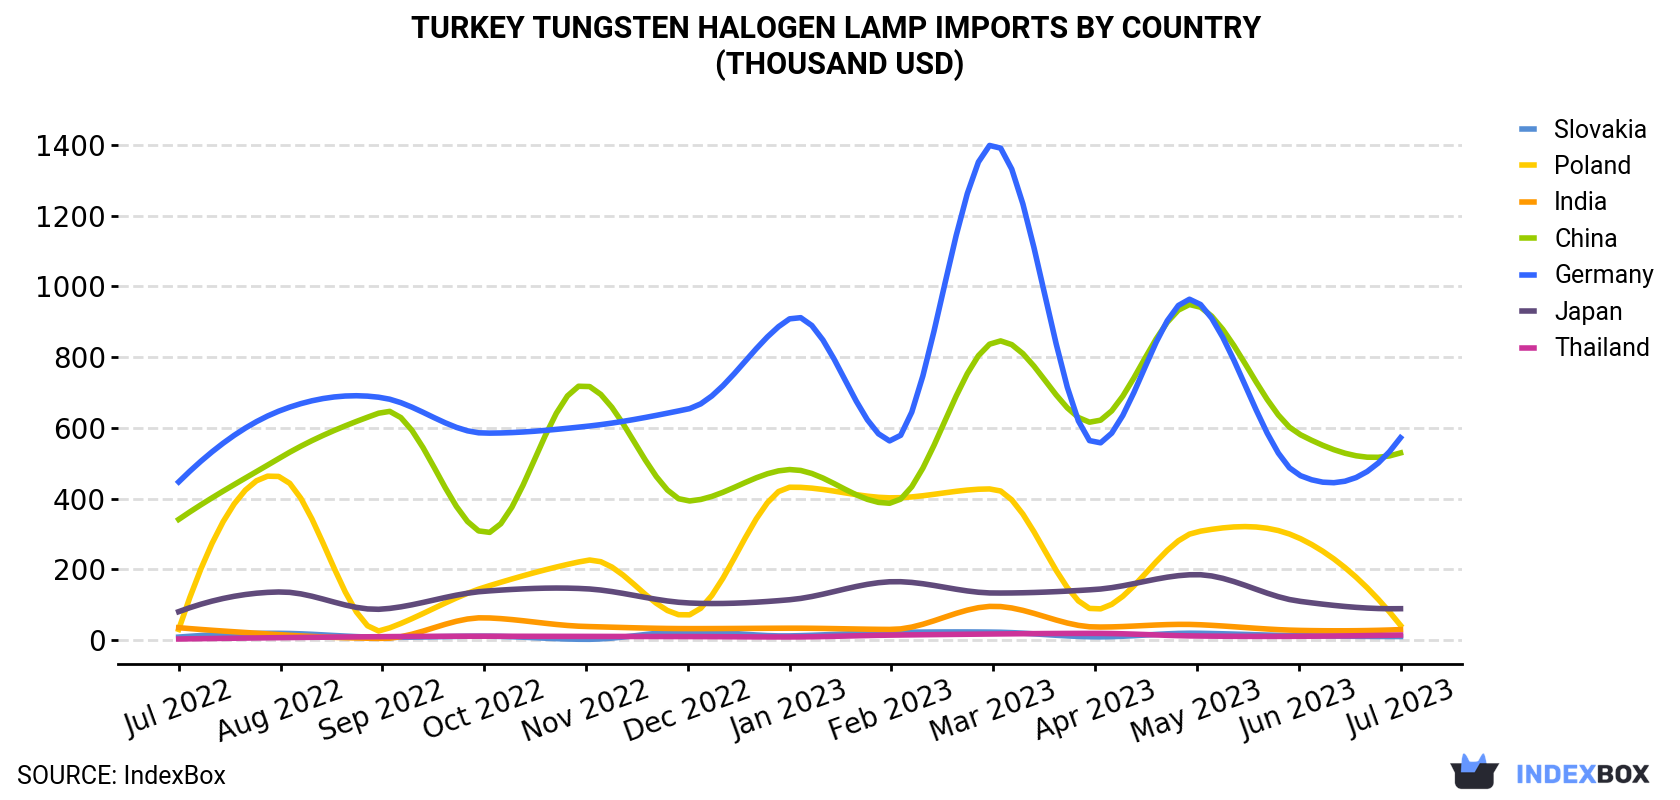 Turkey Tungsten Halogen Lamp Imports By Country (Thousand USD)